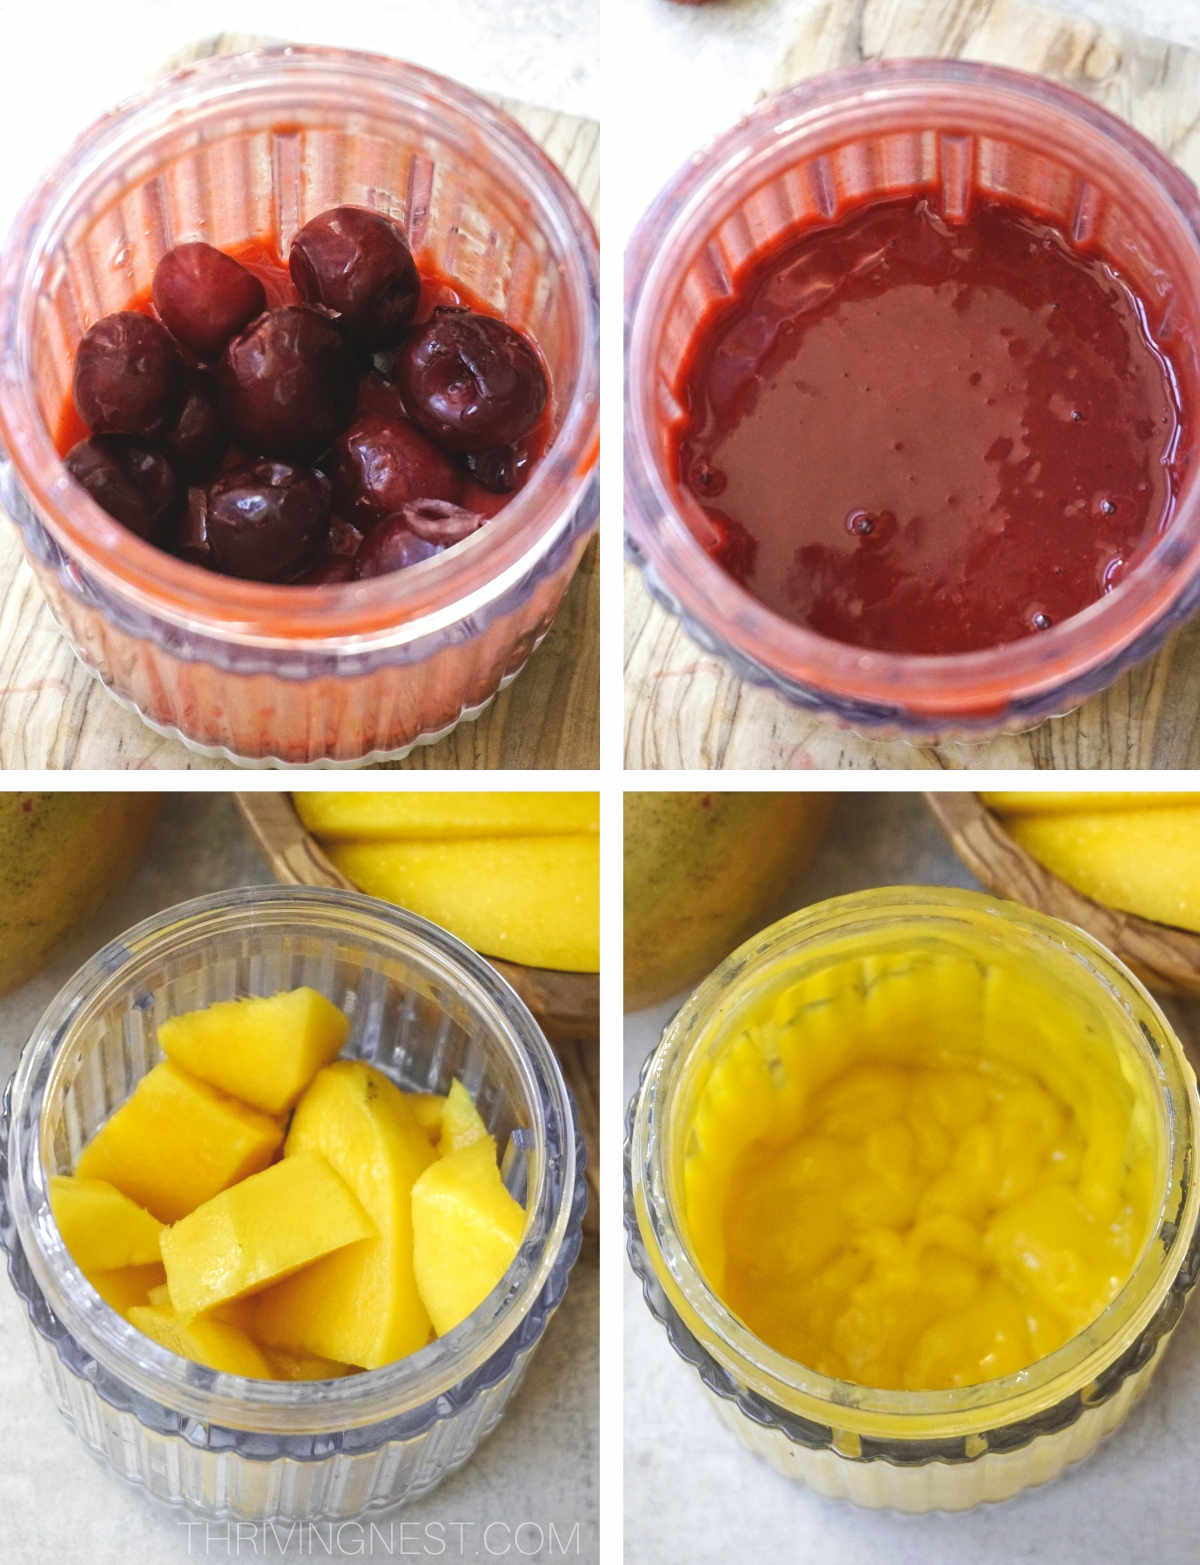 Process shots showing how to blend cherries and mango for popsicles.